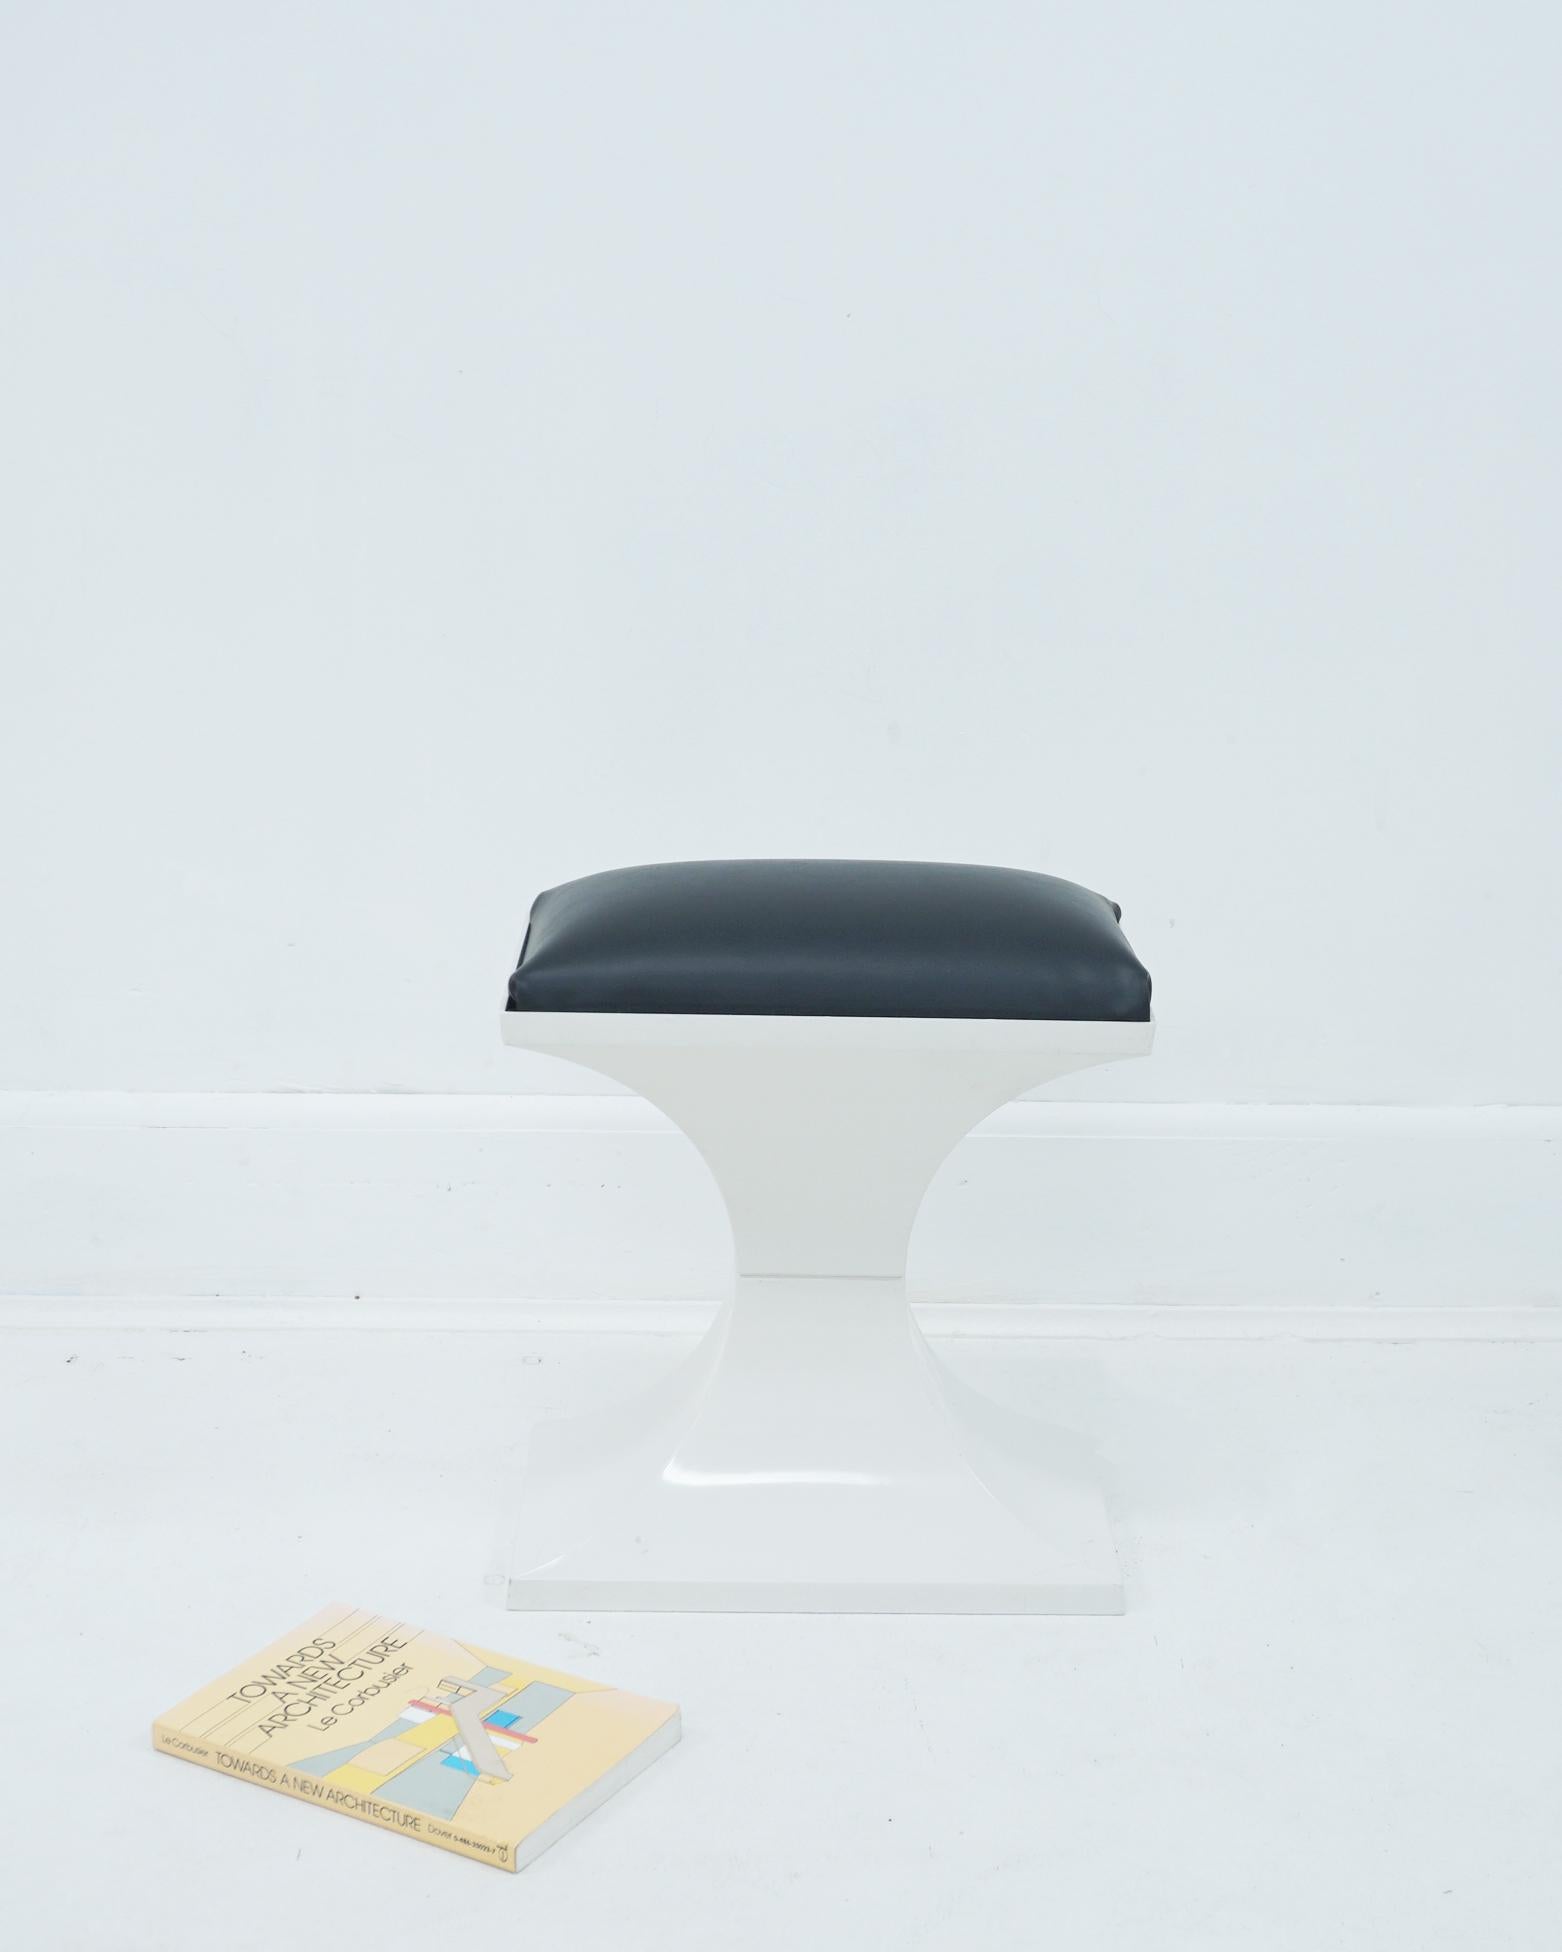 Late 20th Century 1970s Space-age Plastic and Faux Leather Stool Footrest Made in Holland For Sale